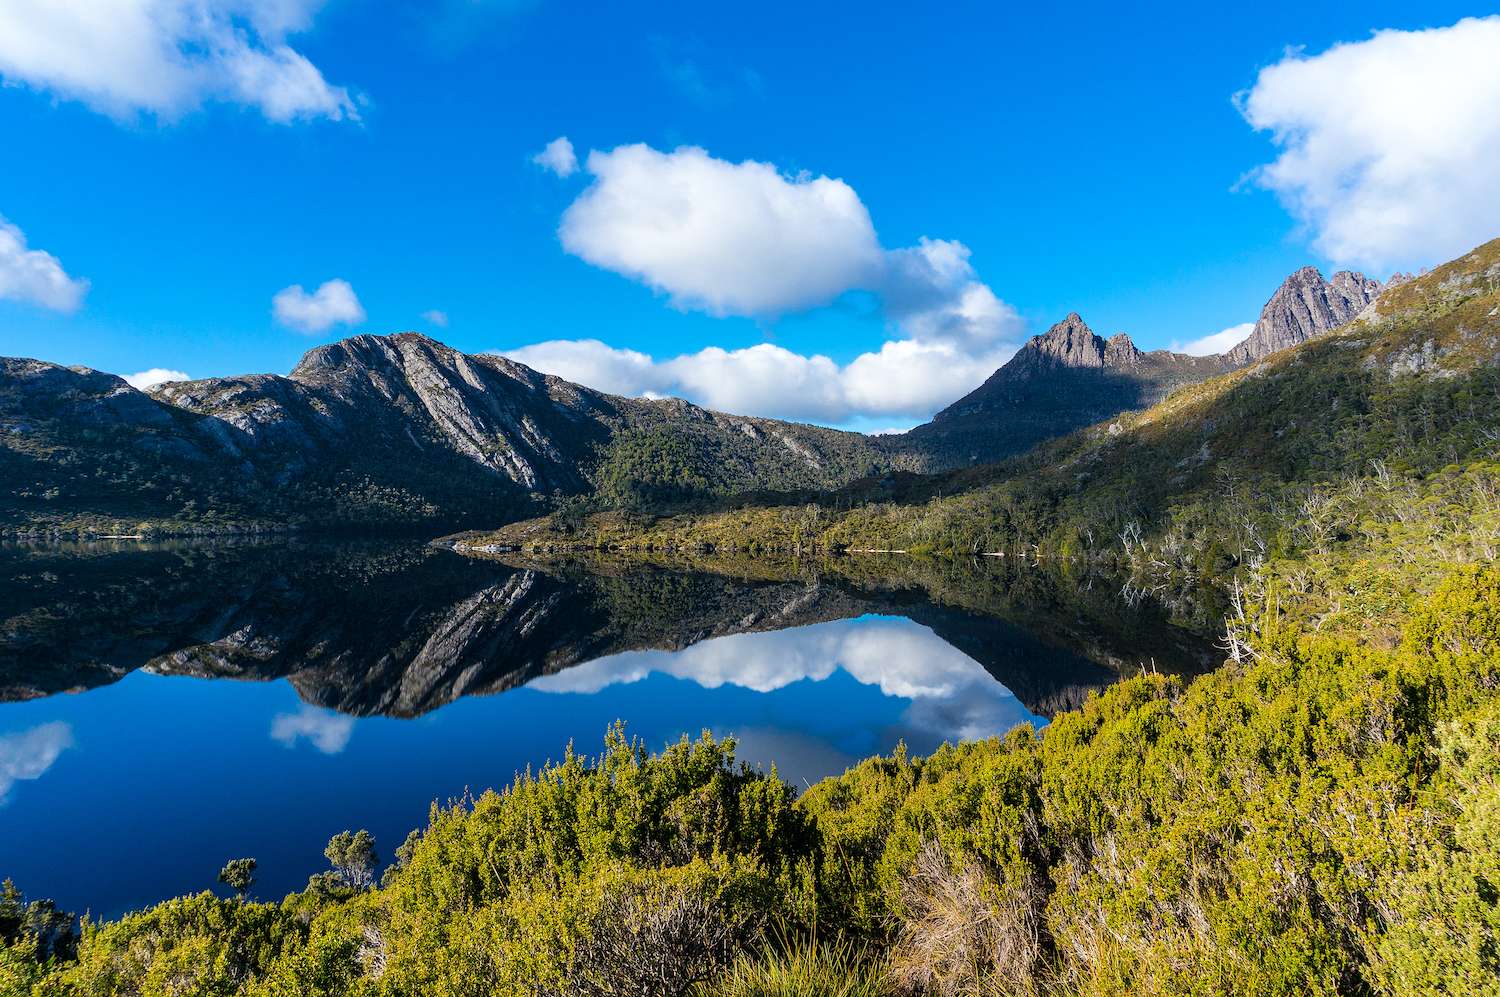 Cradle Mountain on clear day reflected in Dove Lake. Cradle Mountain - Lake St Clair National Park, Tasmania, Australia